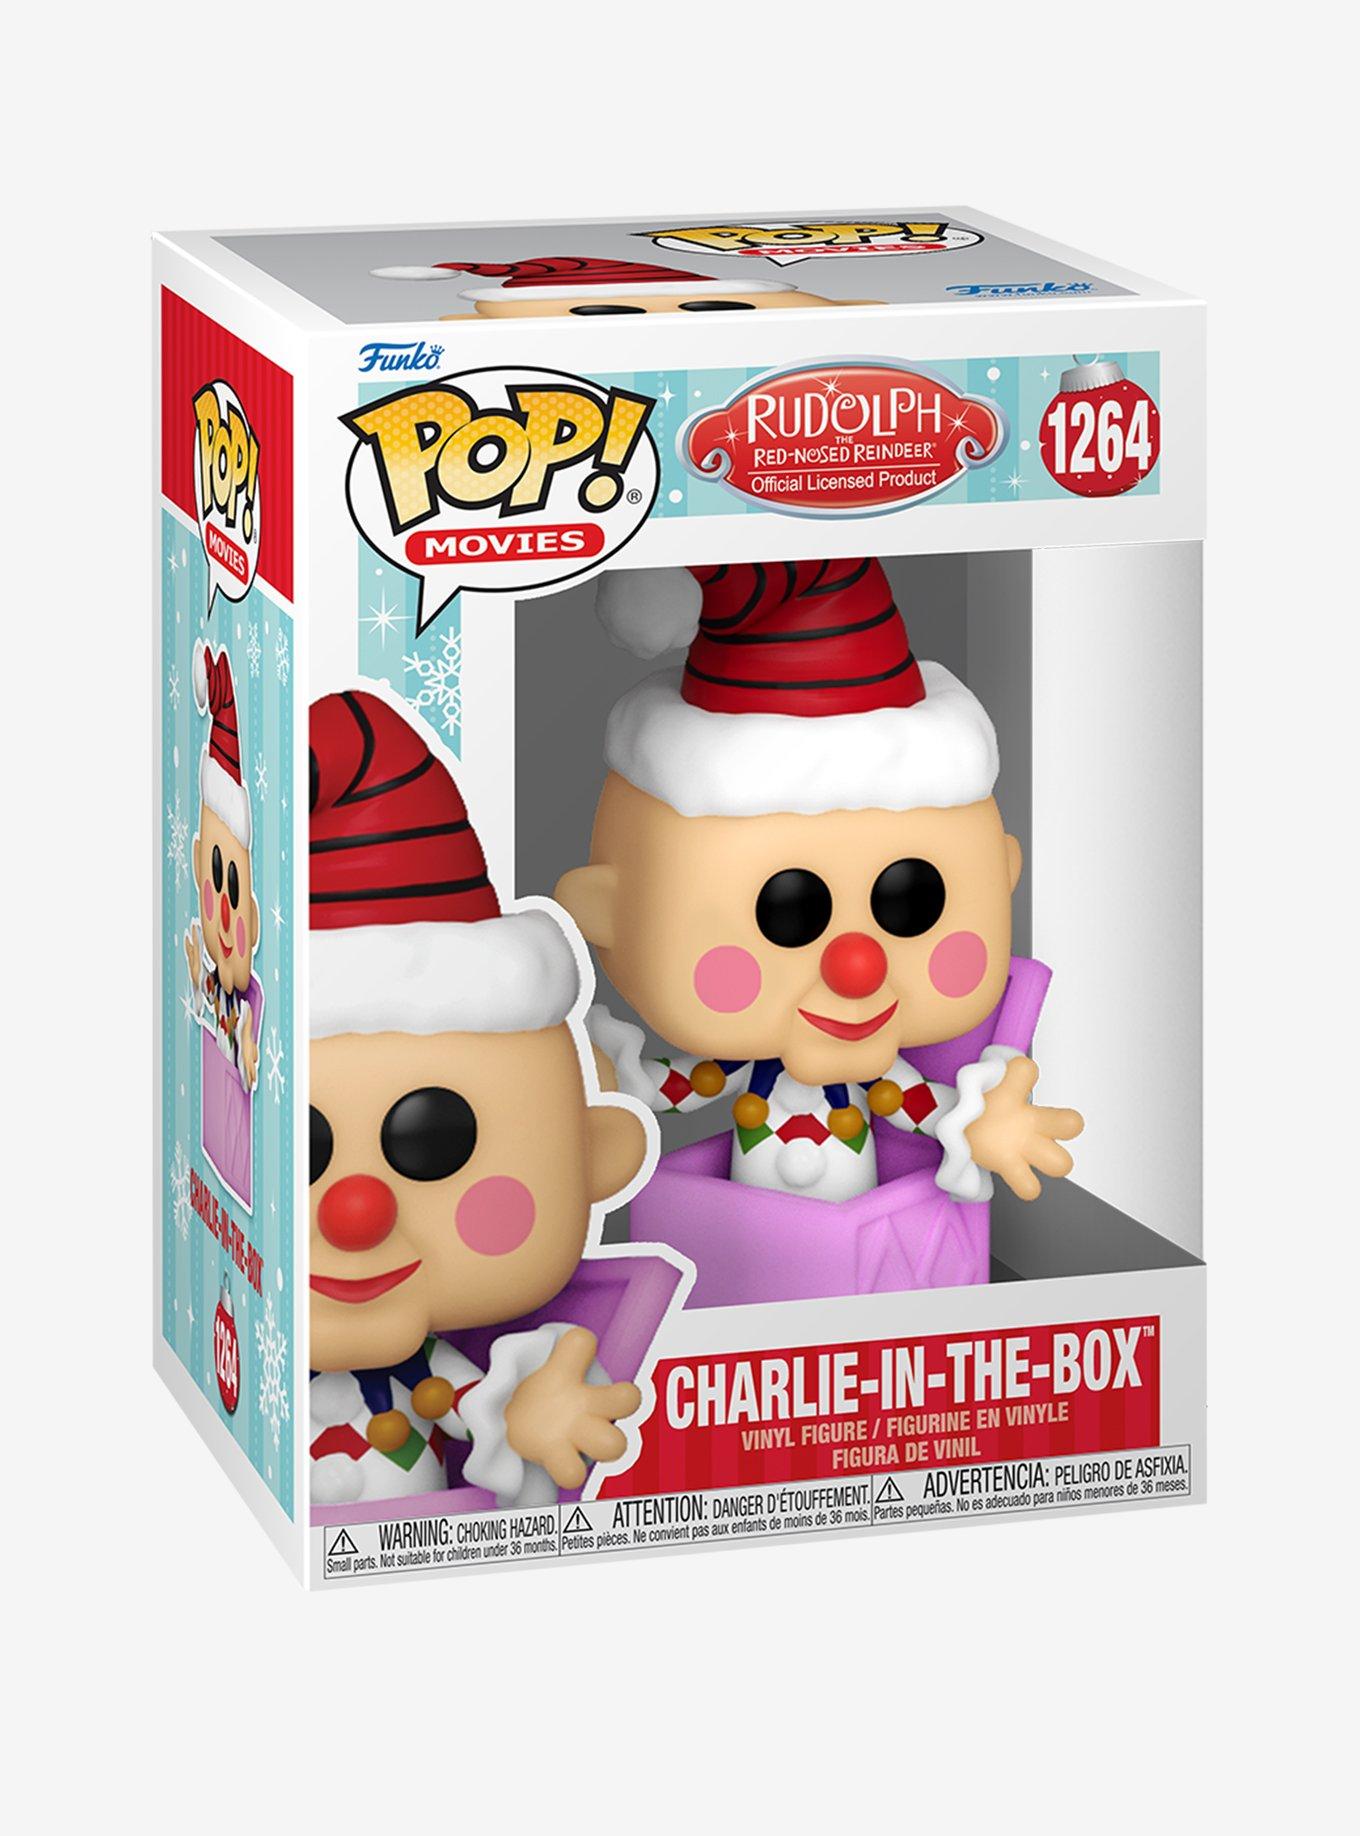 Funko Rudolph The Red-Nosed Reindeer Pop! Movies Charlie-In-The-Box Vinyl Figure